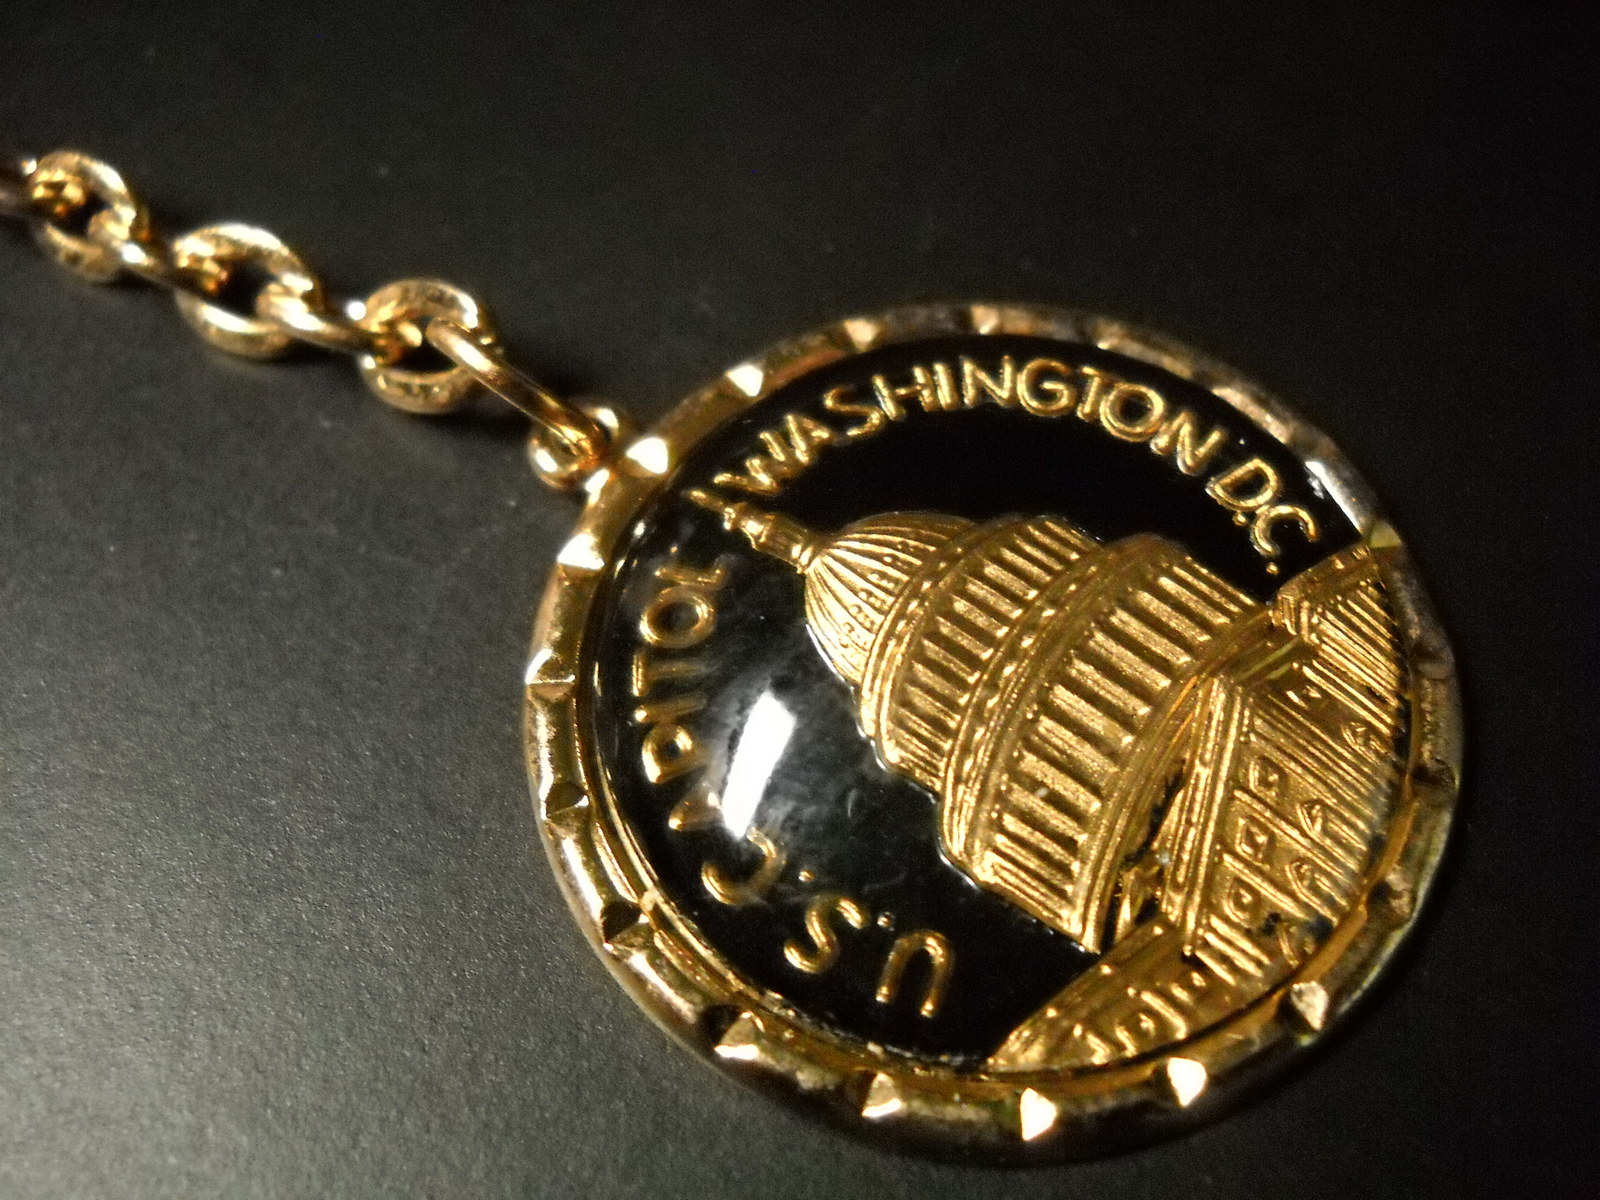 US Capitol Washington DC Key Chain Capitol Building Gold Colored Metal on Black - £5.50 GBP